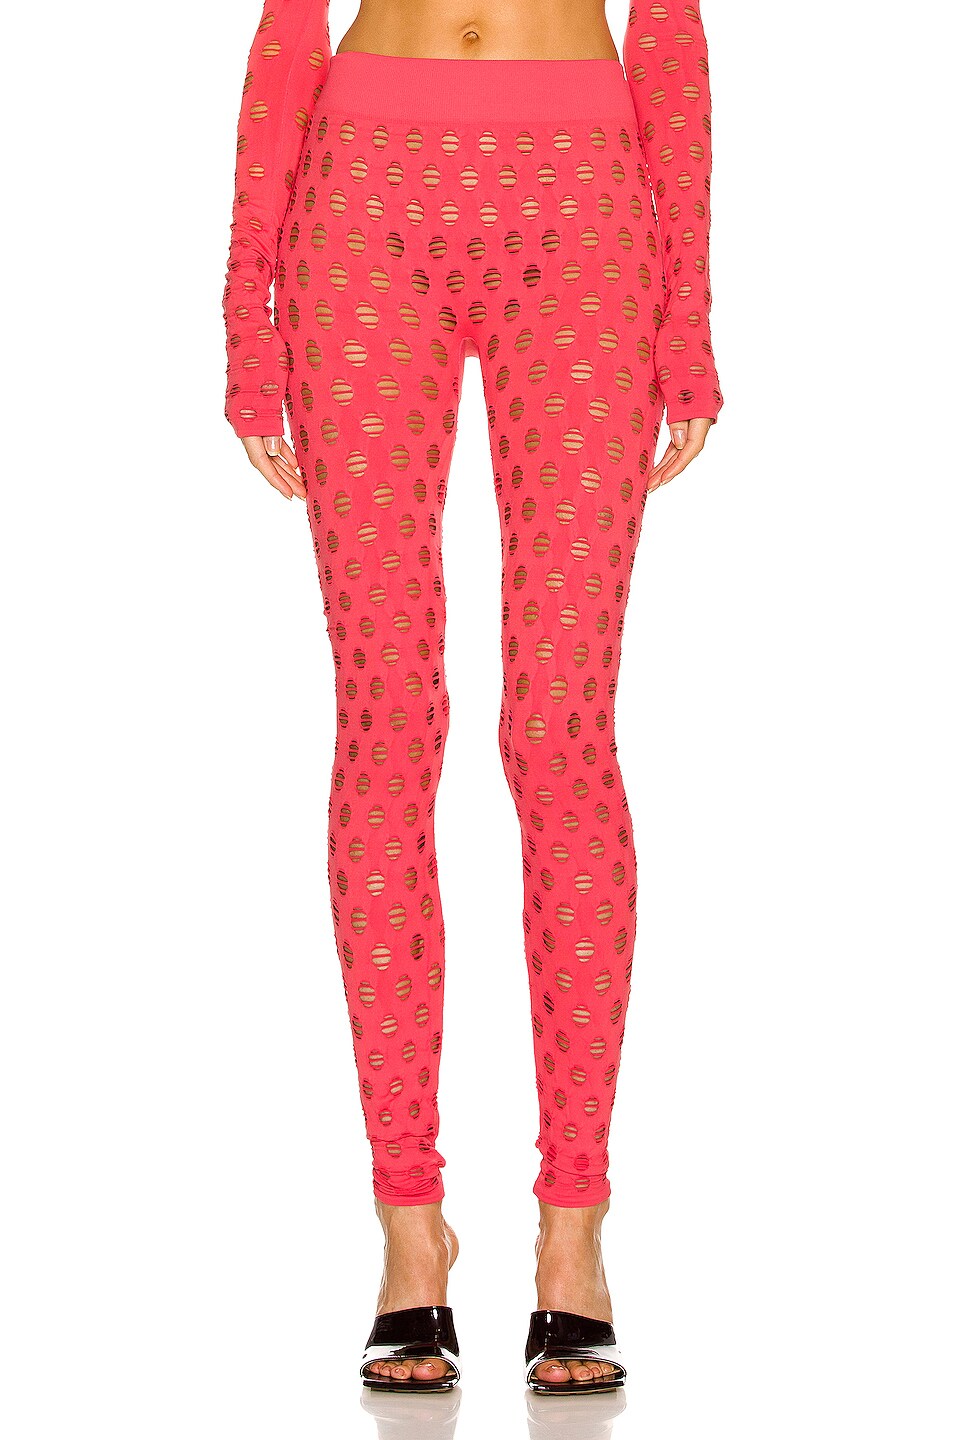 Image 1 of Maisie Wilen Perforated Legging in Coral